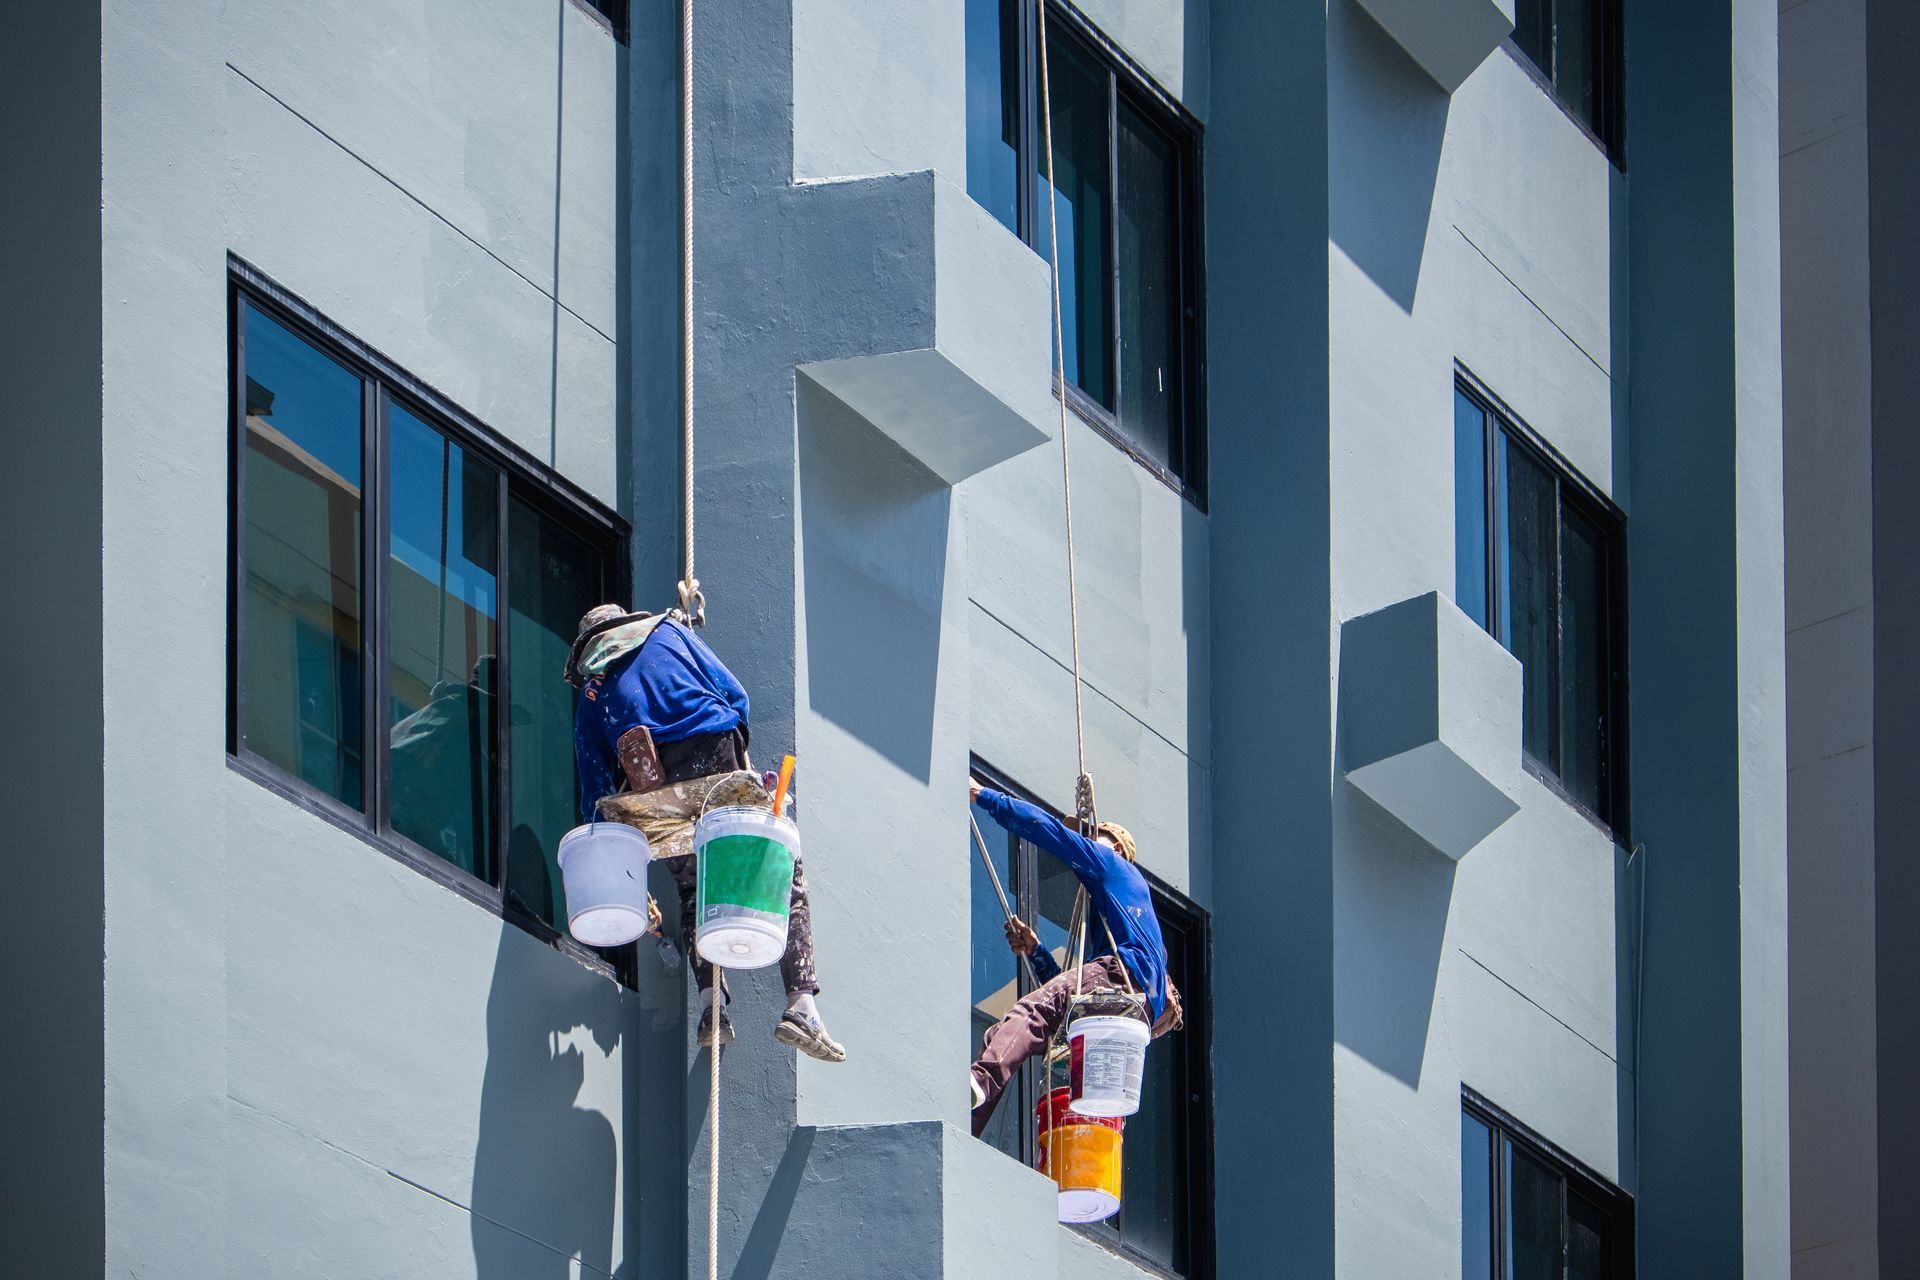 two men paint a building with buckets attached to ropes